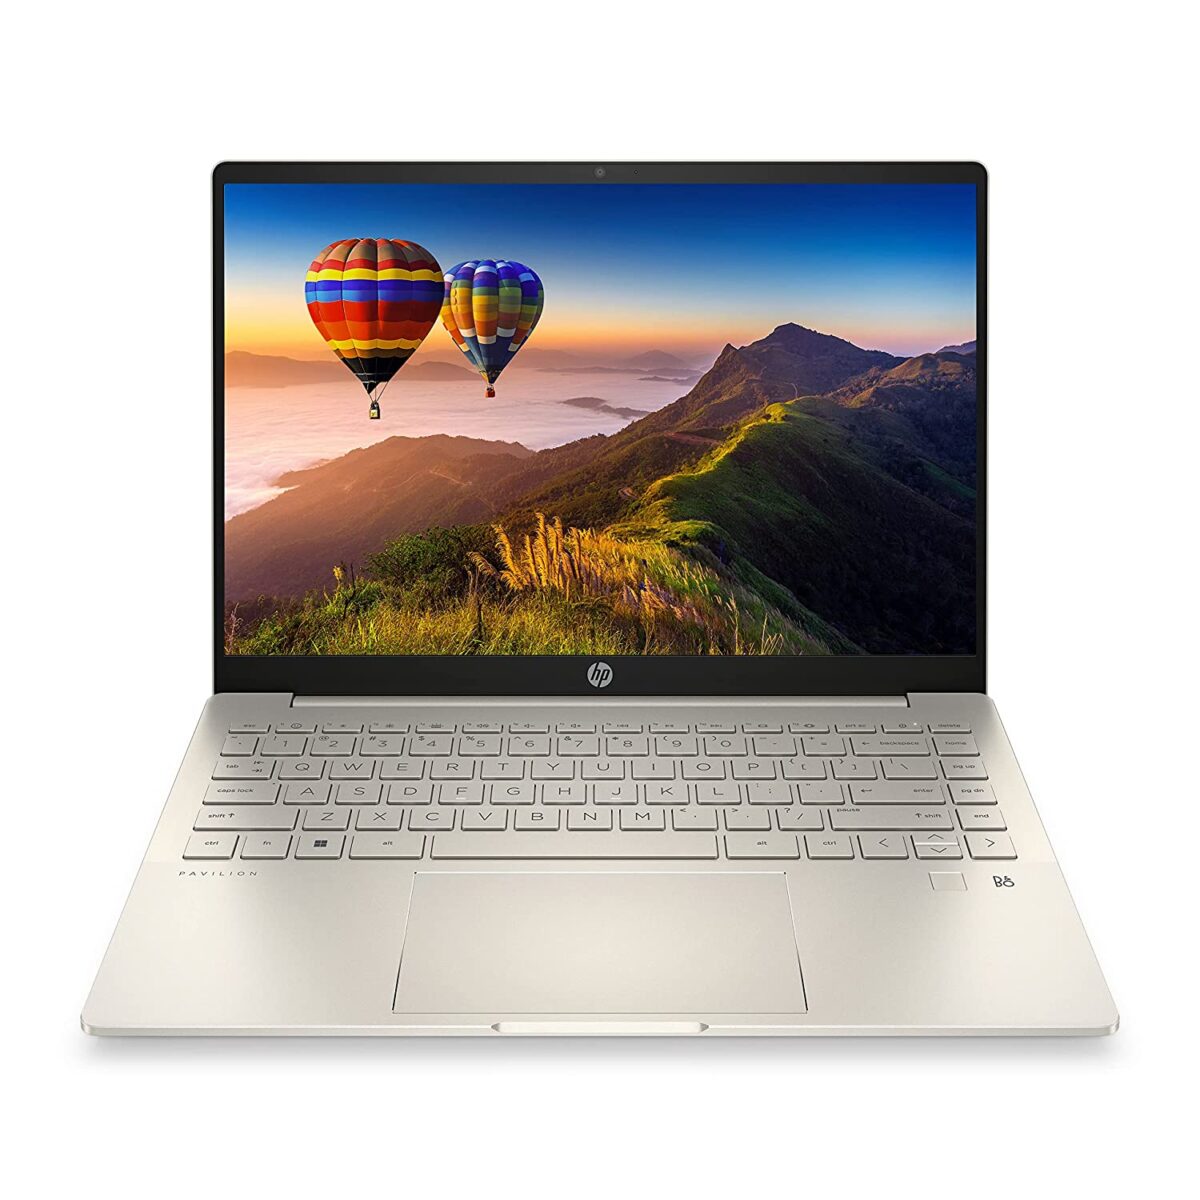 HP Pavilion Plus Laptop 14-eh0025TU 2022 Launched in India ( 12th Gen Intel Core i5-12500H / 16GB / 512GB SSD / 2.2K display )